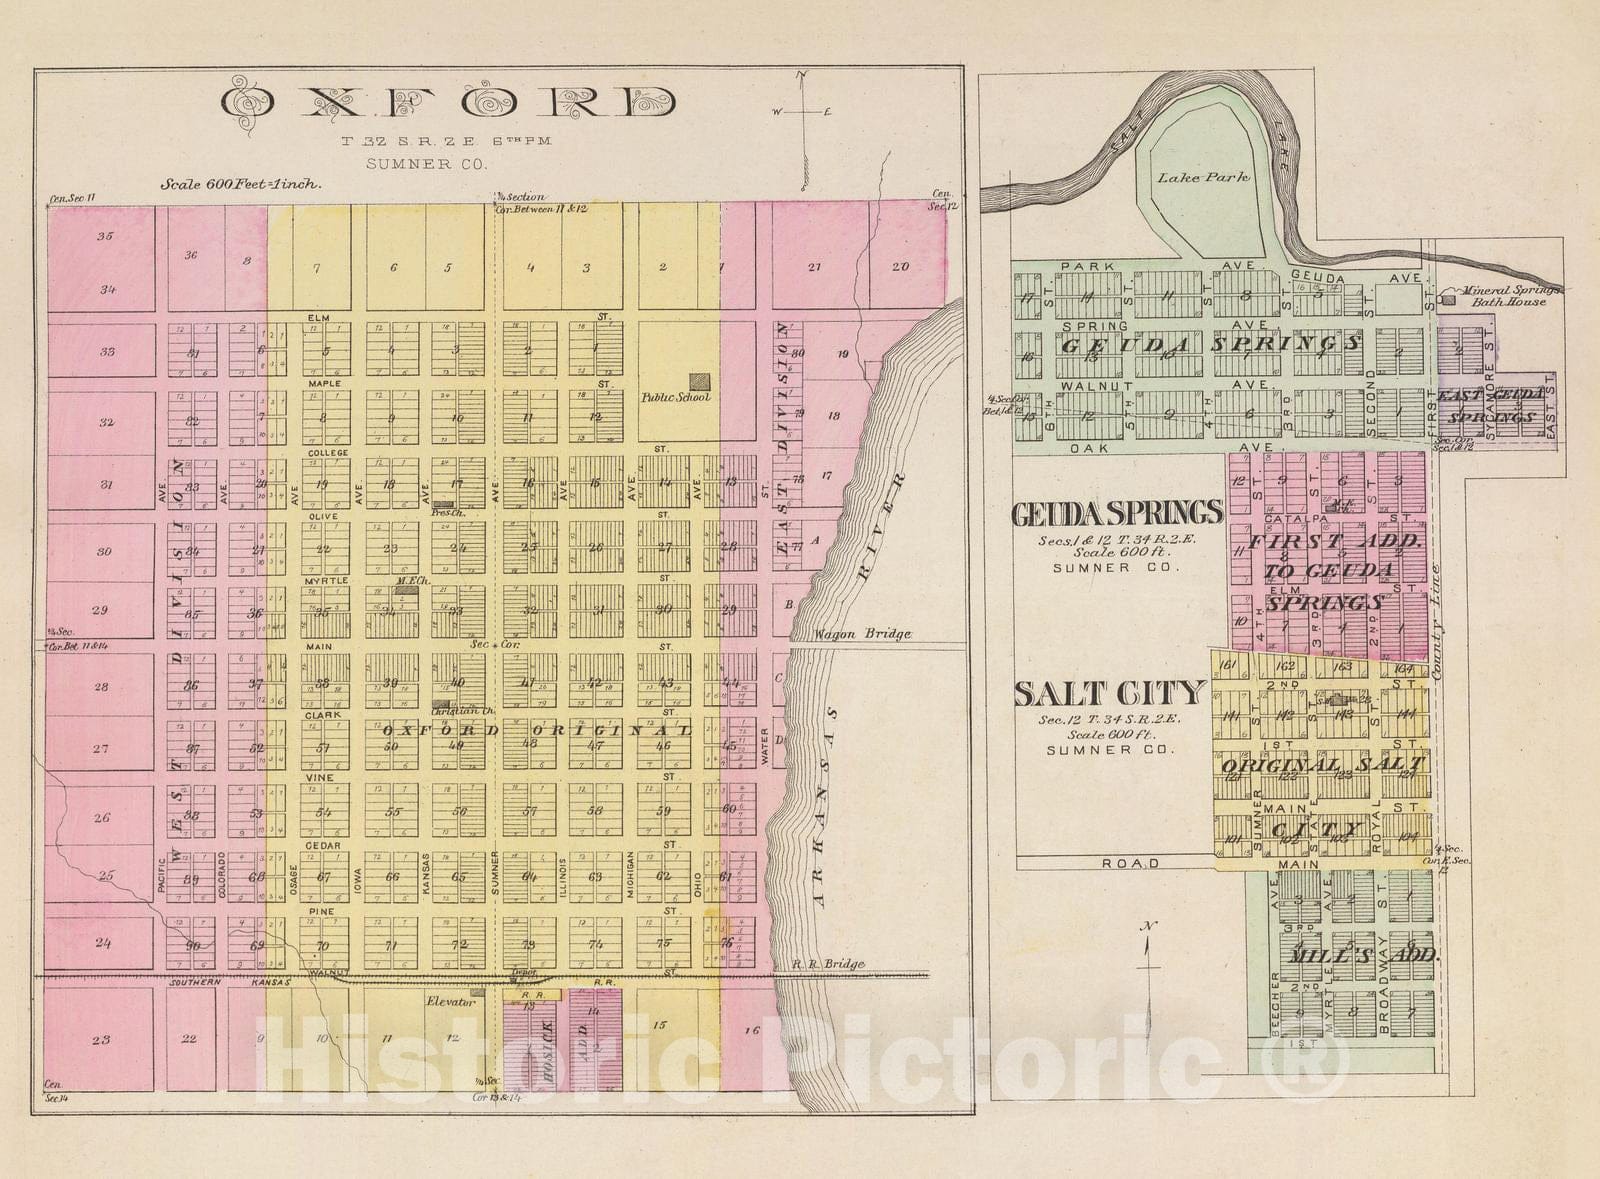 Historic Map : 1887 Oxford, Geuda Springs and Salt City. - Vintage Wall Art